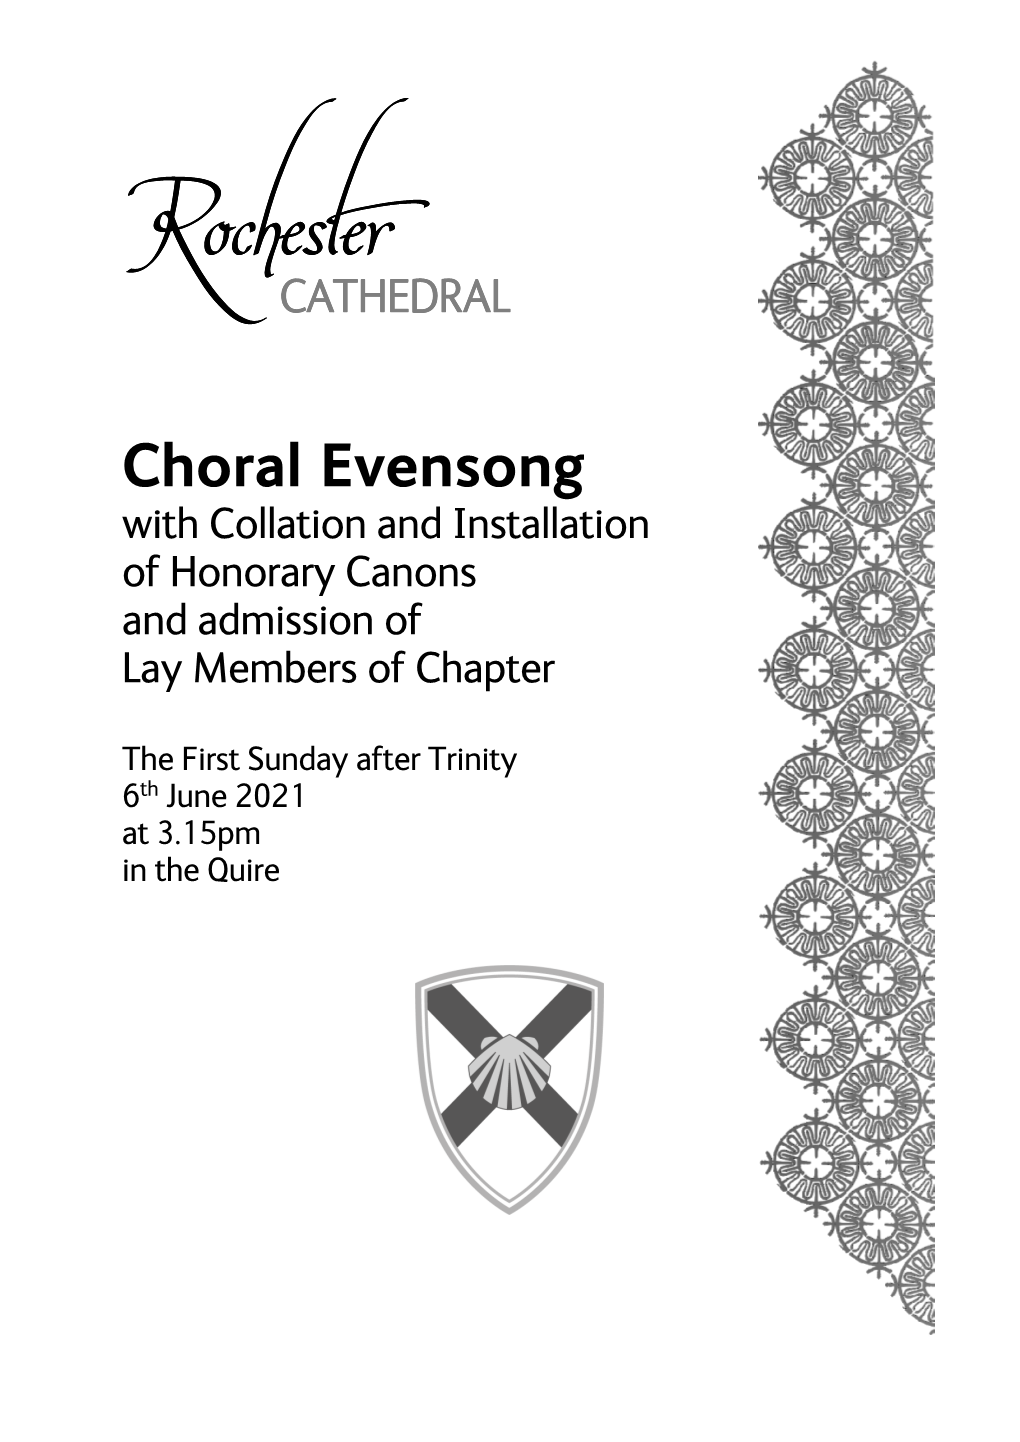 Choral Evensong with Collation and Installation of Honorary Canons and Admission of Lay Members of Chapter